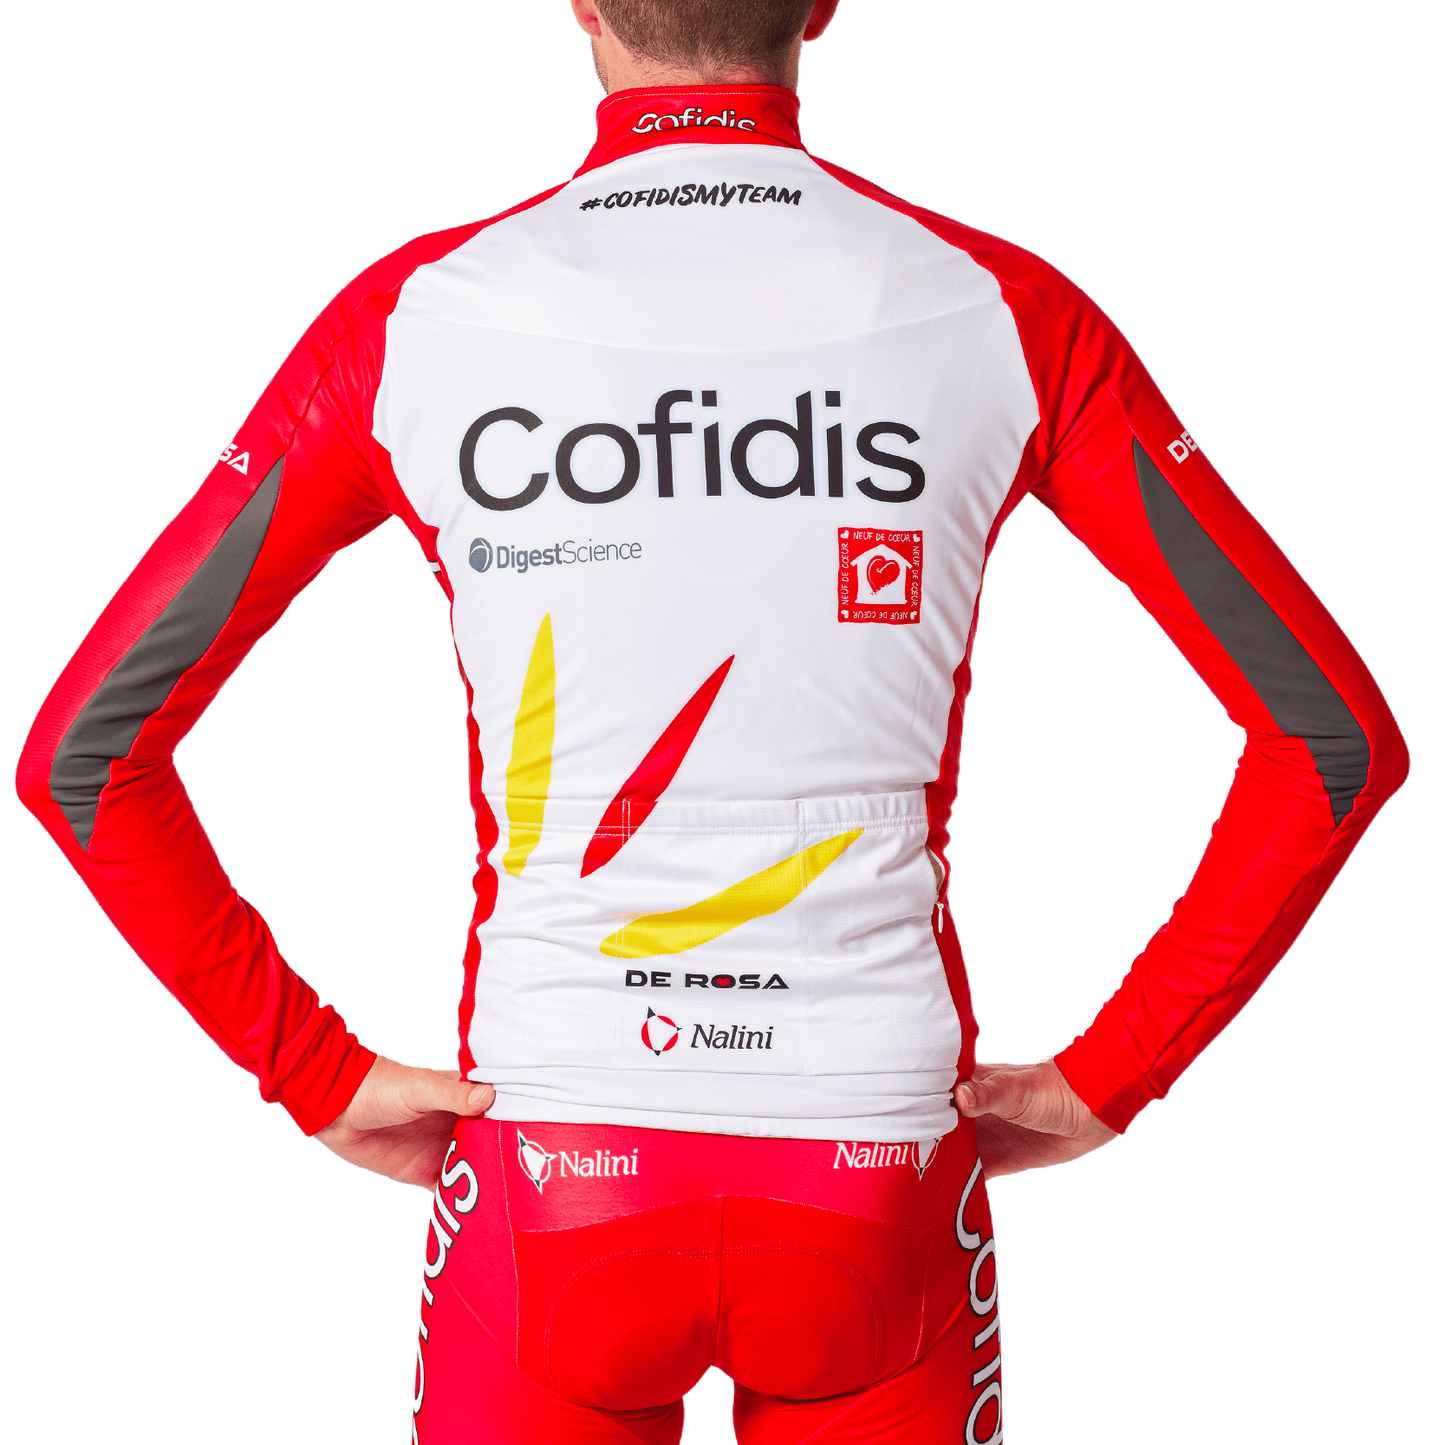 Maillot manches longues Cofidis 2021